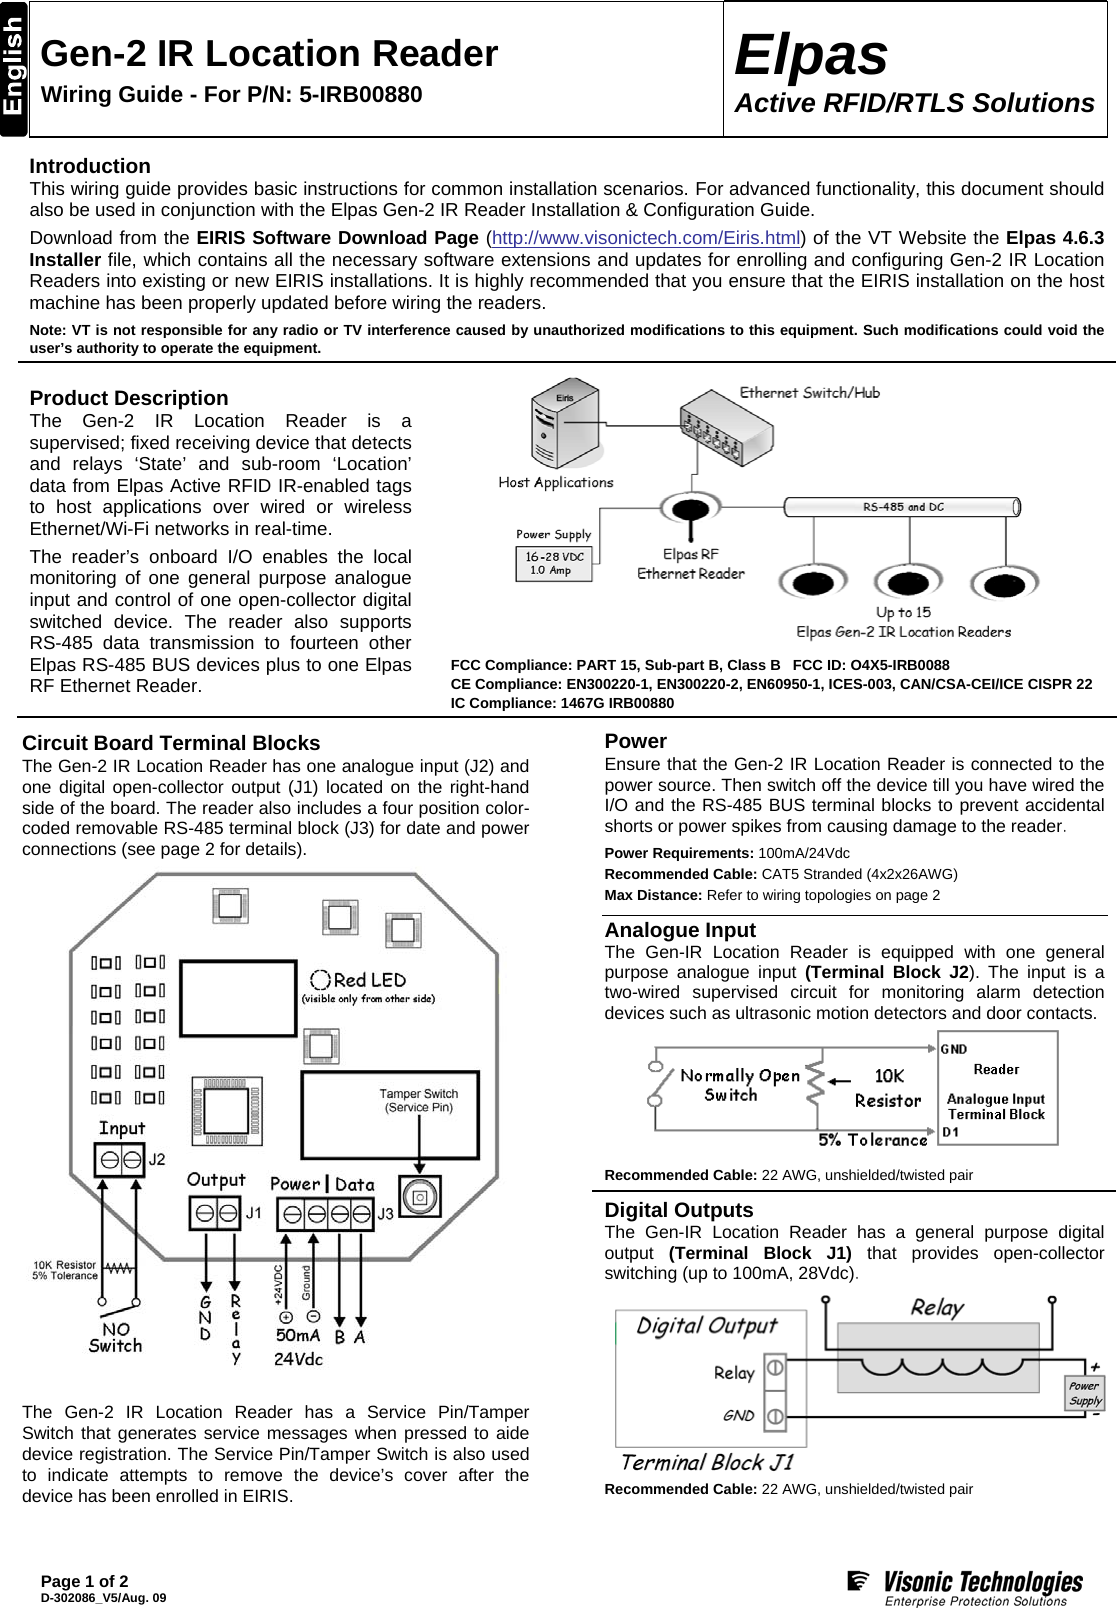  Gen-2 IR Location Reader Wiring Guide - For P/N: 5-IRB00880  Elpas Active RFID/RTLS Solutions  Page 1 of 2 D-302086_V5/Aug. 09  Introduction This wiring guide provides basic instructions for common installation scenarios. For advanced functionality, this document should also be used in conjunction with the Elpas Gen-2 IR Reader Installation &amp; Configuration Guide. Download from the EIRIS Software Download Page (http://www.visonictech.com/Eiris.html) of the VT Website the Elpas 4.6.3 Installer file, which contains all the necessary software extensions and updates for enrolling and configuring Gen-2 IR Location Readers into existing or new EIRIS installations. It is highly recommended that you ensure that the EIRIS installation on the host machine has been properly updated before wiring the readers. Note: VT is not responsible for any radio or TV interference caused by unauthorized modifications to this equipment. Such modifications could void the user’s authority to operate the equipment. Product Description The Gen-2 IR Location Reader is a supervised; fixed receiving device that detects and relays ‘State’ and sub-room ‘Location’ data from Elpas Active RFID IR-enabled tags to host applications over wired or wireless Ethernet/Wi-Fi networks in real-time. The reader’s onboard I/O enables the local monitoring of one general purpose analogue input and control of one open-collector digital switched device. The reader also supports RS-485 data transmission to fourteen other Elpas RS-485 BUS devices plus to one Elpas RF Ethernet Reader.          FCC Compliance: PART 15, Sub-part B, Class B   FCC ID: O4X5-IRB0088     CE Compliance: EN300220-1, EN300220-2, EN60950-1, ICES-003, CAN/CSA-CEI/ICE CISPR 22     IC Compliance: 1467G IRB00880  Circuit Board Terminal Blocks   The Gen-2 IR Location Reader has one analogue input (J2) and one digital open-collector output (J1) located on the right-hand side of the board. The reader also includes a four position color-coded removable RS-485 terminal block (J3) for date and power connections (see page 2 for details).   The Gen-2 IR Location Reader has a Service Pin/Tamper Switch that generates service messages when pressed to aide device registration. The Service Pin/Tamper Switch is also used to indicate attempts to remove the device’s cover after the device has been enrolled in EIRIS. Power Ensure that the Gen-2 IR Location Reader is connected to the power source. Then switch off the device till you have wired the I/O and the RS-485 BUS terminal blocks to prevent accidental shorts or power spikes from causing damage to the reader. Power Requirements: 100mA/24Vdc Recommended Cable: CAT5 Stranded (4x2x26AWG) Max Distance: Refer to wiring topologies on page 2  Analogue Input The Gen-IR Location Reader is equipped with one general purpose analogue input (Terminal Block J2). The input is a two-wired supervised circuit for monitoring alarm detection devices such as ultrasonic motion detectors and door contacts.  Recommended Cable: 22 AWG, unshielded/twisted pair  Digital Outputs The Gen-IR Location Reader has a general purpose digital output  (Terminal Block J1) that provides open-collector switching (up to 100mA, 28Vdc).  Recommended Cable: 22 AWG, unshielded/twisted pair 